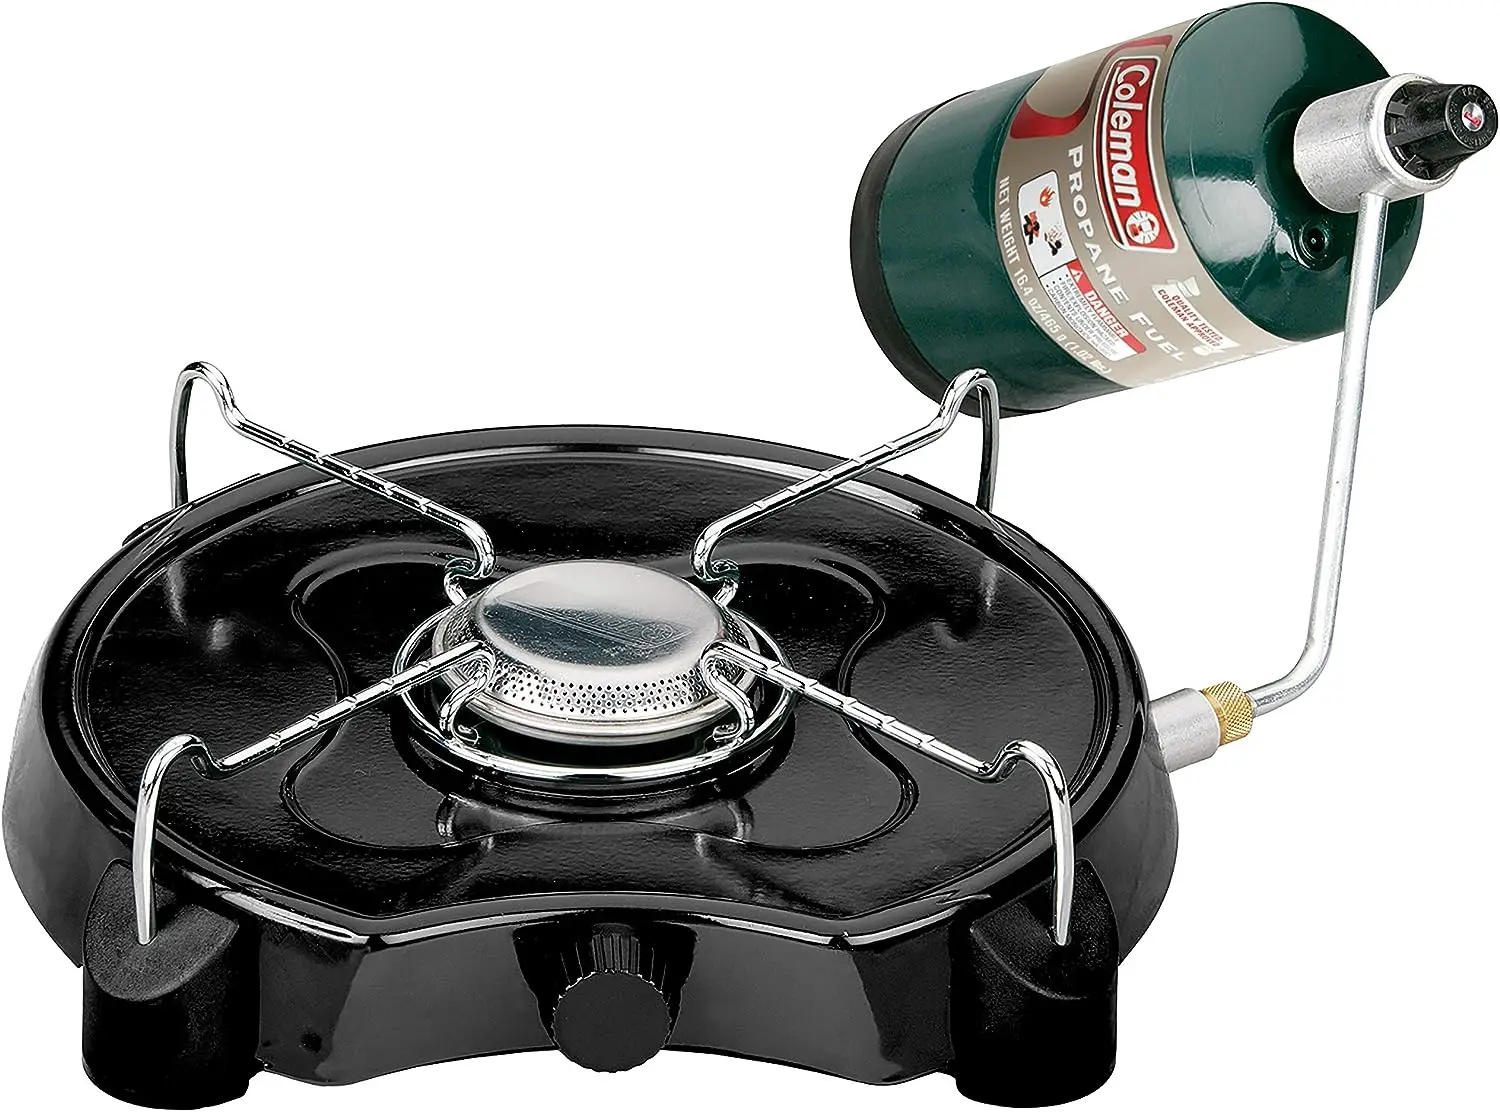 

PowerPack Propane Gas Camping Stove, 1-Burner Portable Stove with 7500 BTUs for Camping, Hunting, Backpacking, and Other Outdoor